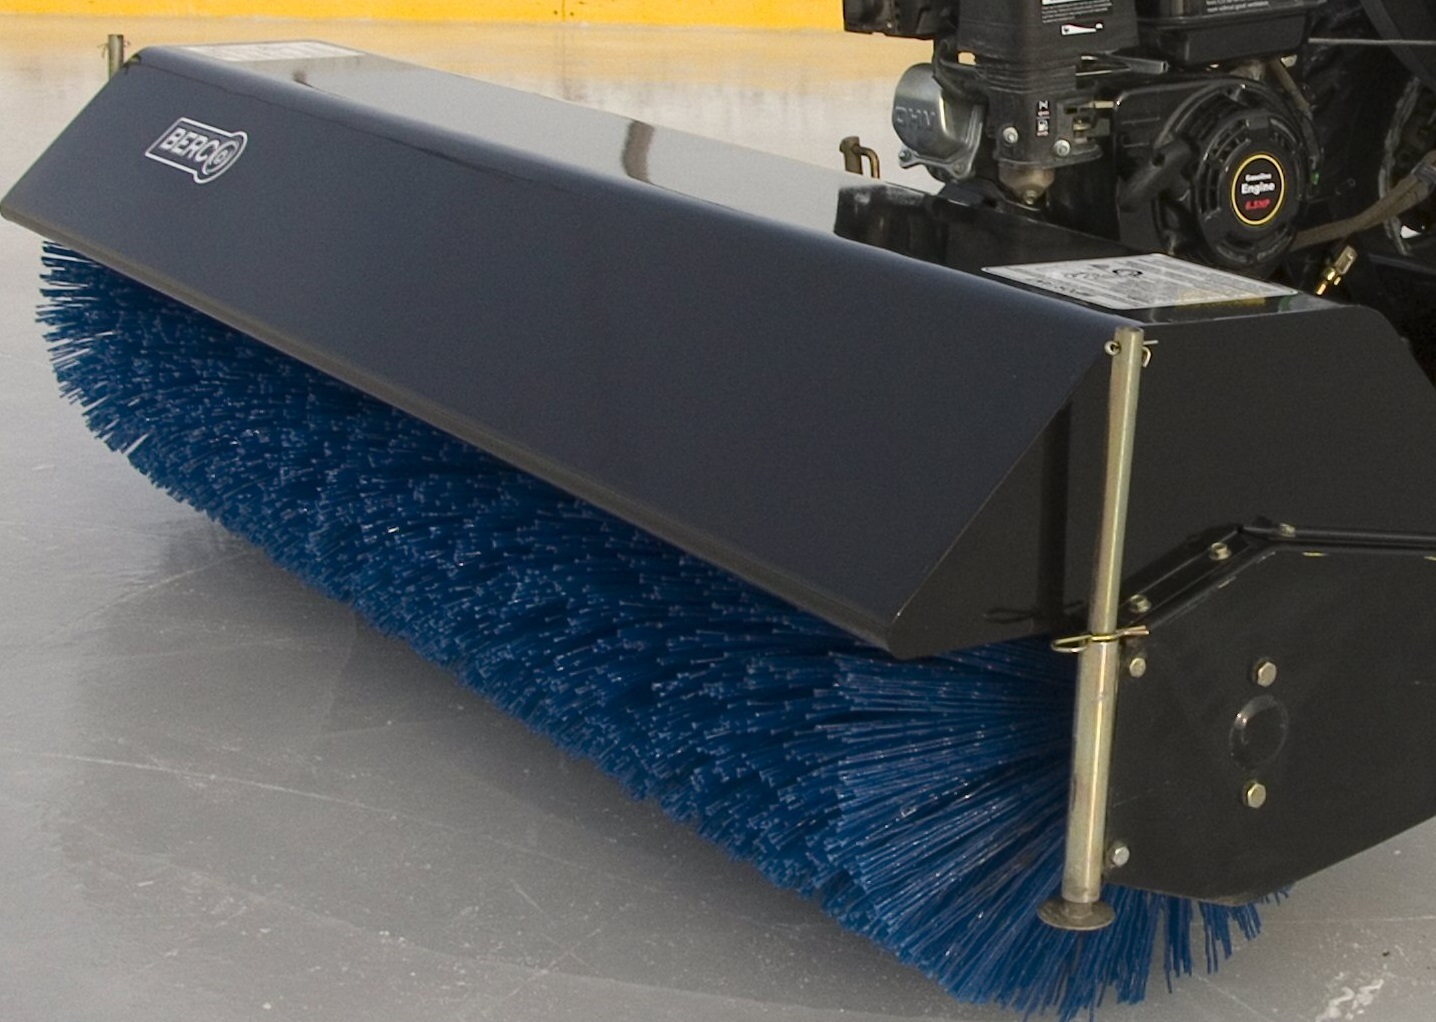 60" Rotary Broom for tractors equipped with ''Skid Steer'' style attach